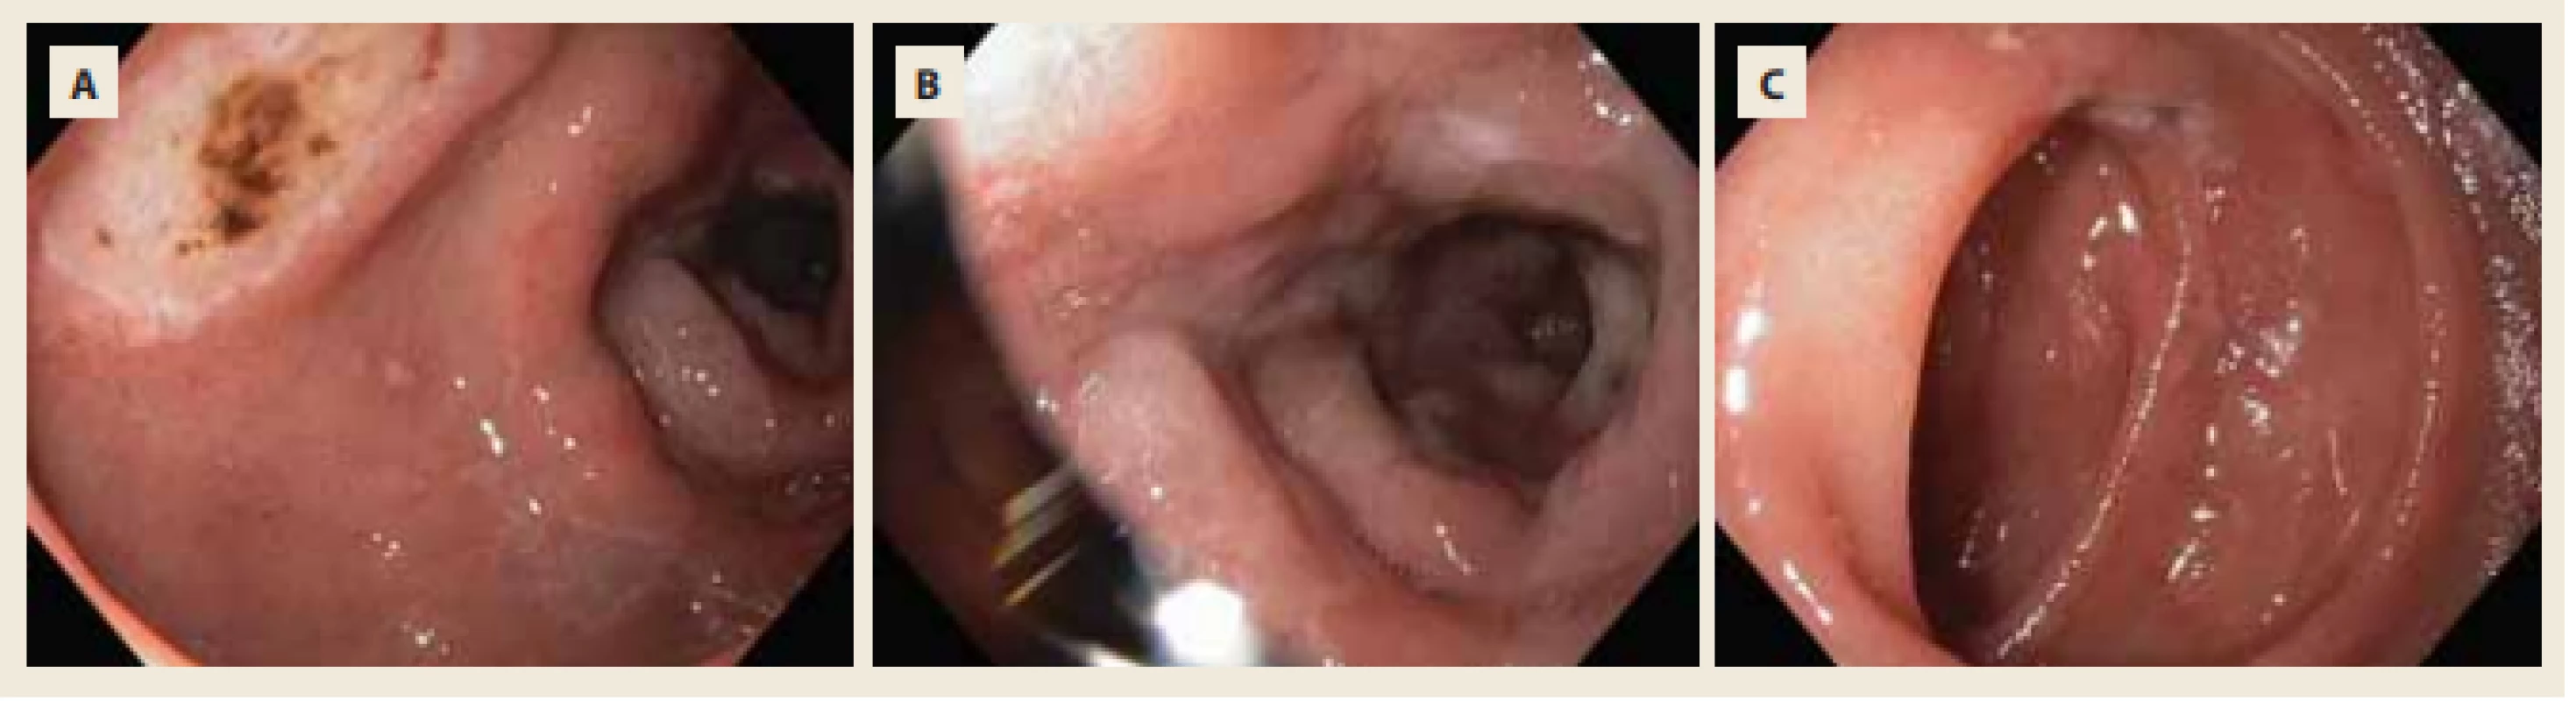 Mnohočetné akutní vředy bulbu a D2 duodena charakteru Forrest IIc a III. <br>
Fig. 3. Multiple acute ulcers of duodenal bulb and D2 duodenum – Forrest IIc and III. 